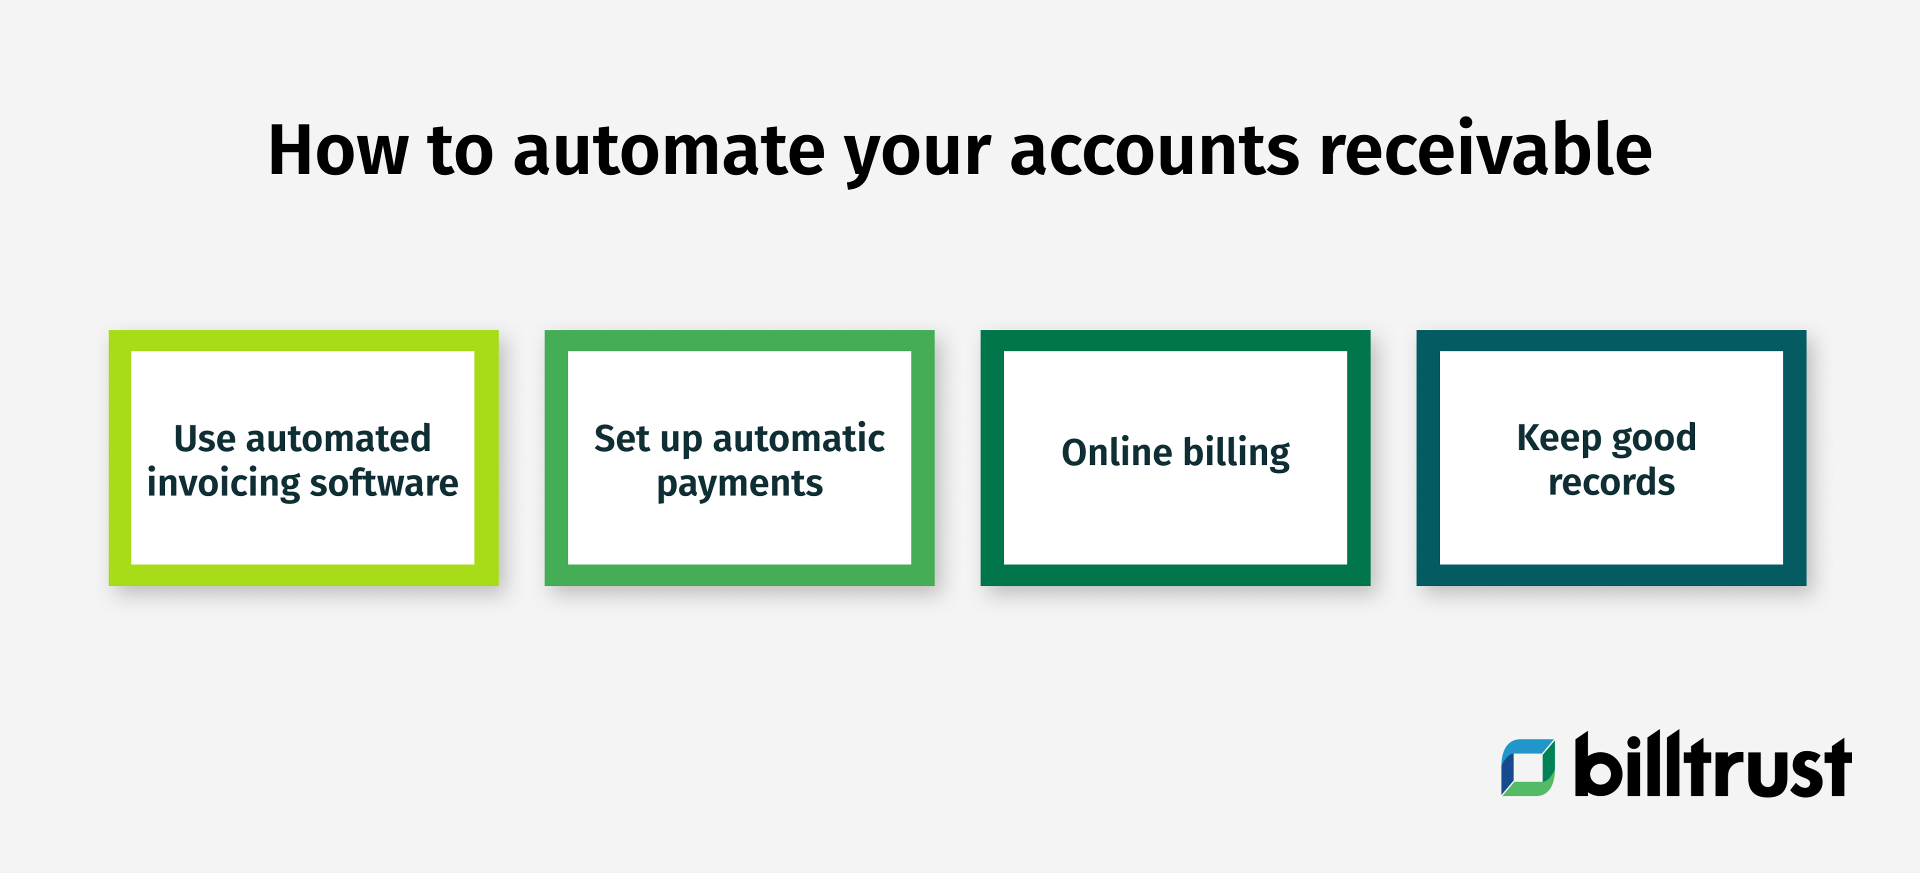 tips on how to automate your accounts receivable